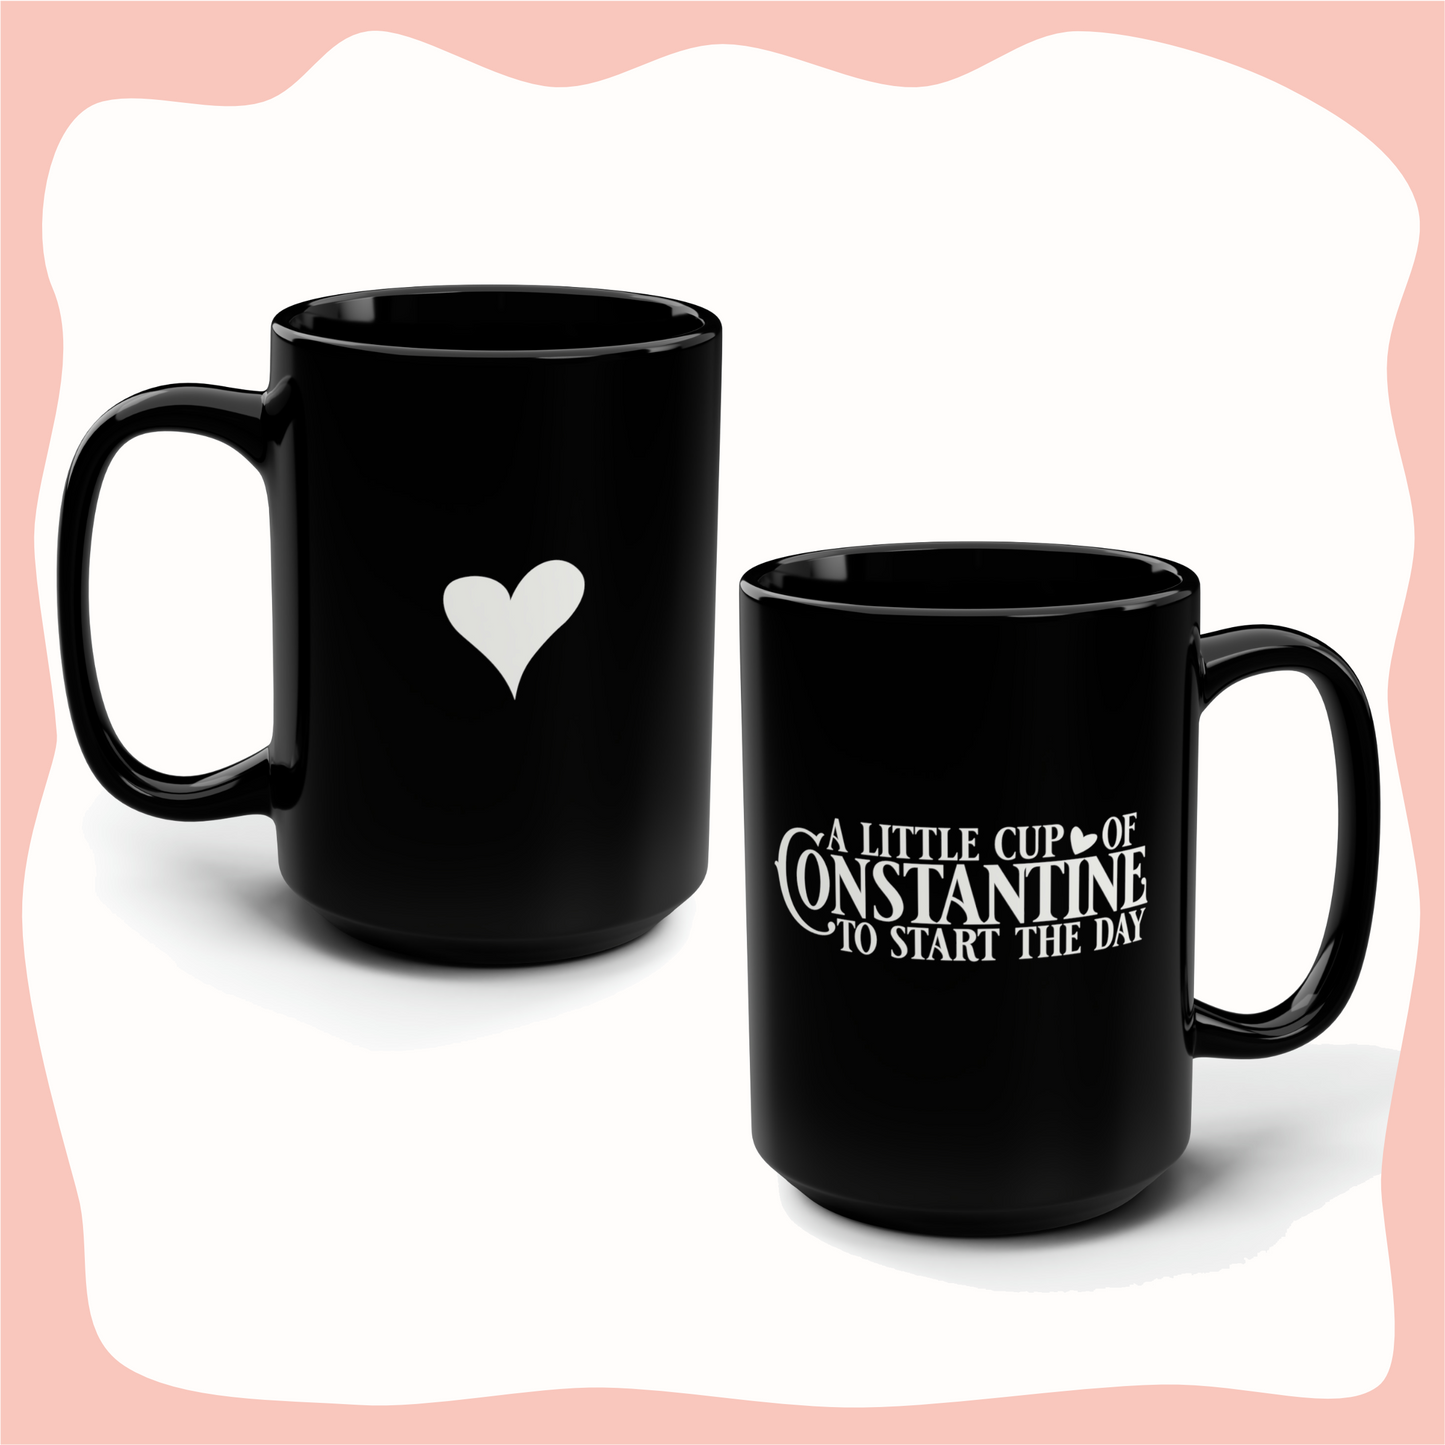 15oz dual sides of A Little Cup of Constantine Mug